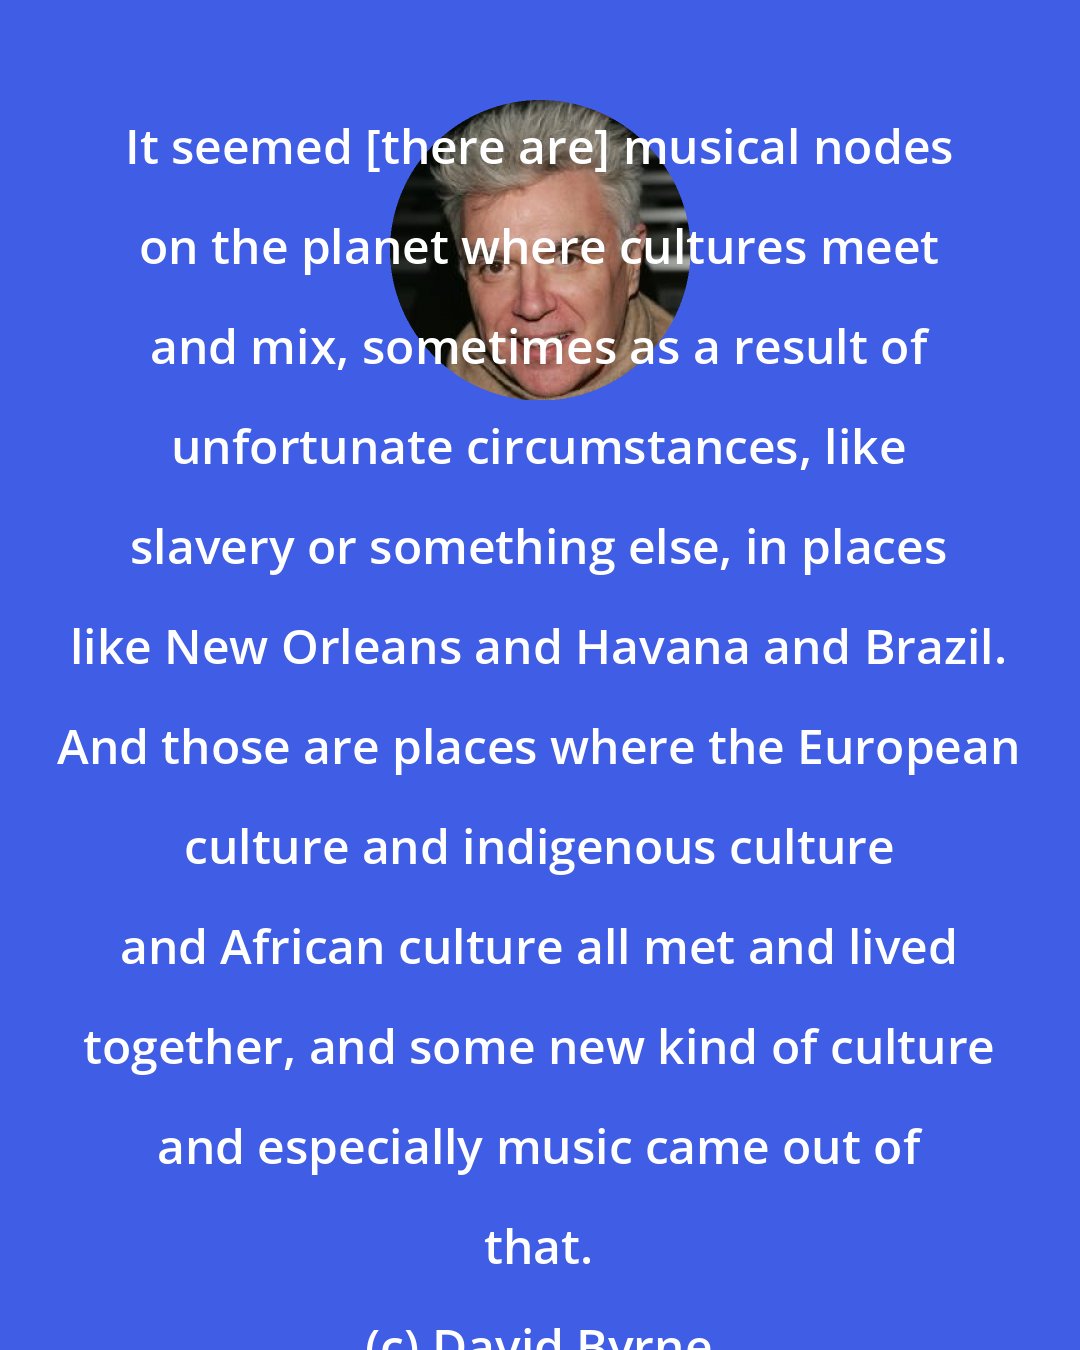 David Byrne: It seemed [there are] musical nodes on the planet where cultures meet and mix, sometimes as a result of unfortunate circumstances, like slavery or something else, in places like New Orleans and Havana and Brazil. And those are places where the European culture and indigenous culture and African culture all met and lived together, and some new kind of culture and especially music came out of that.